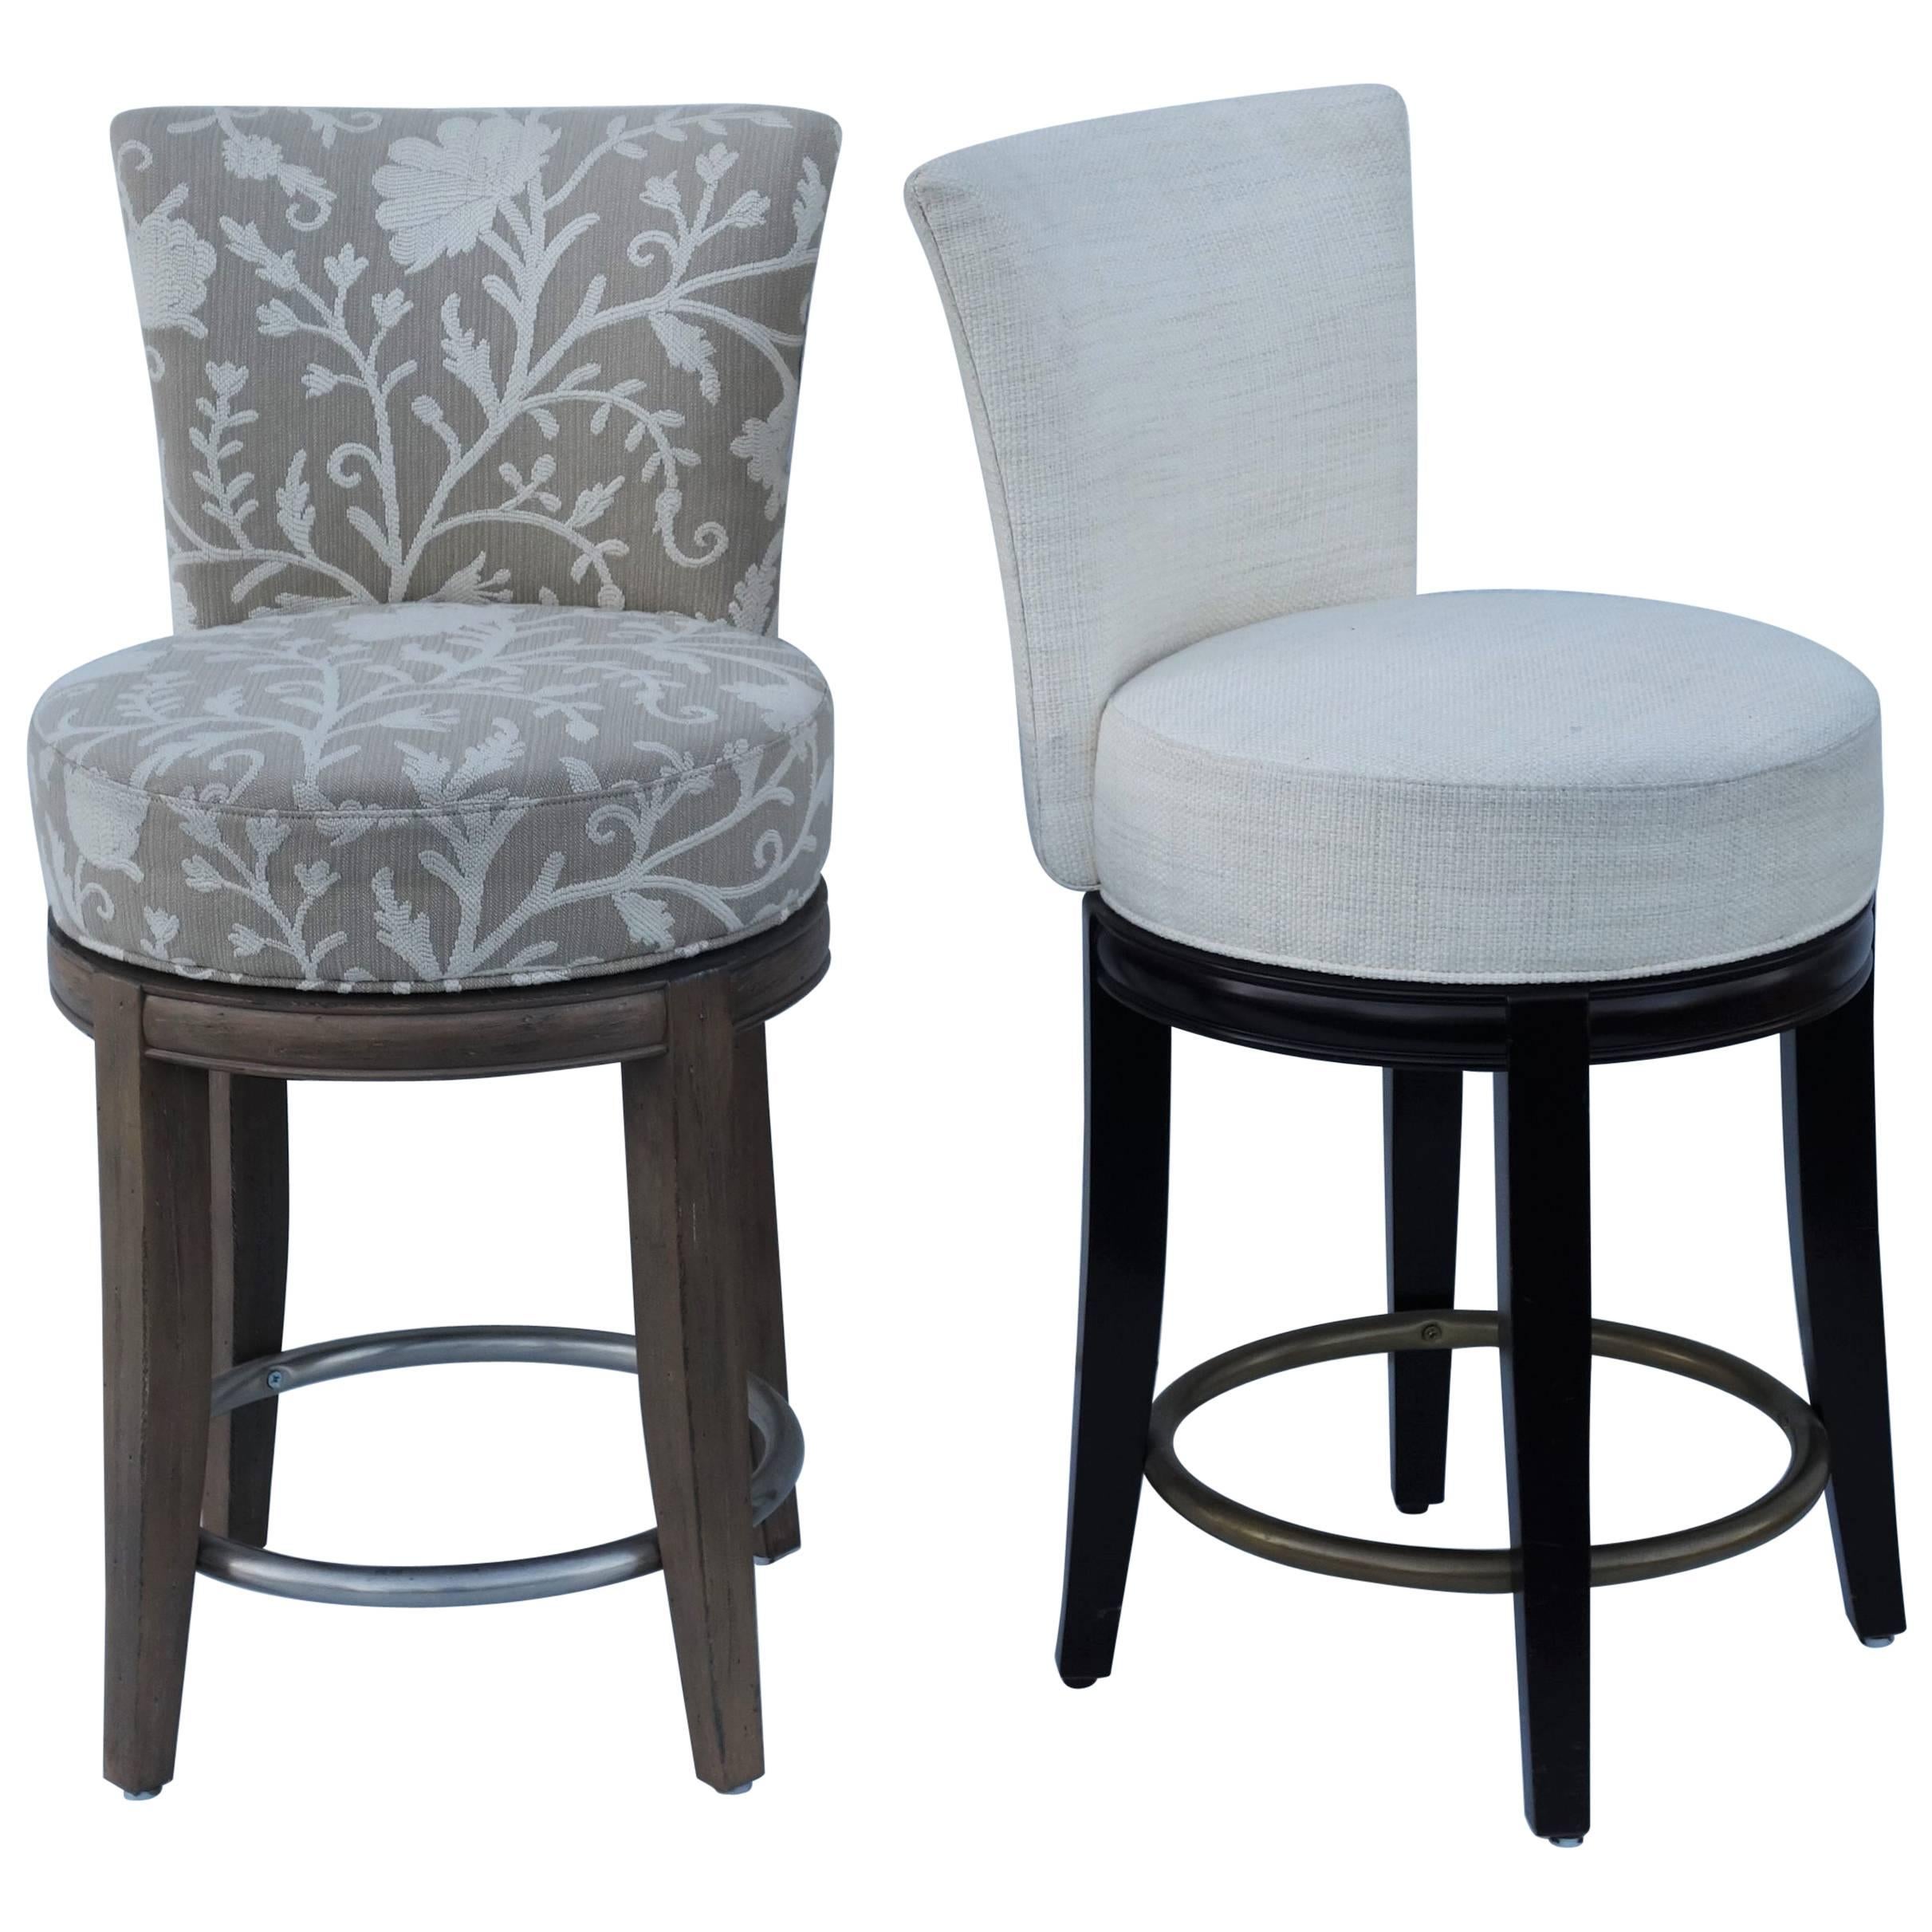 Swivel Counter Stool For Sale